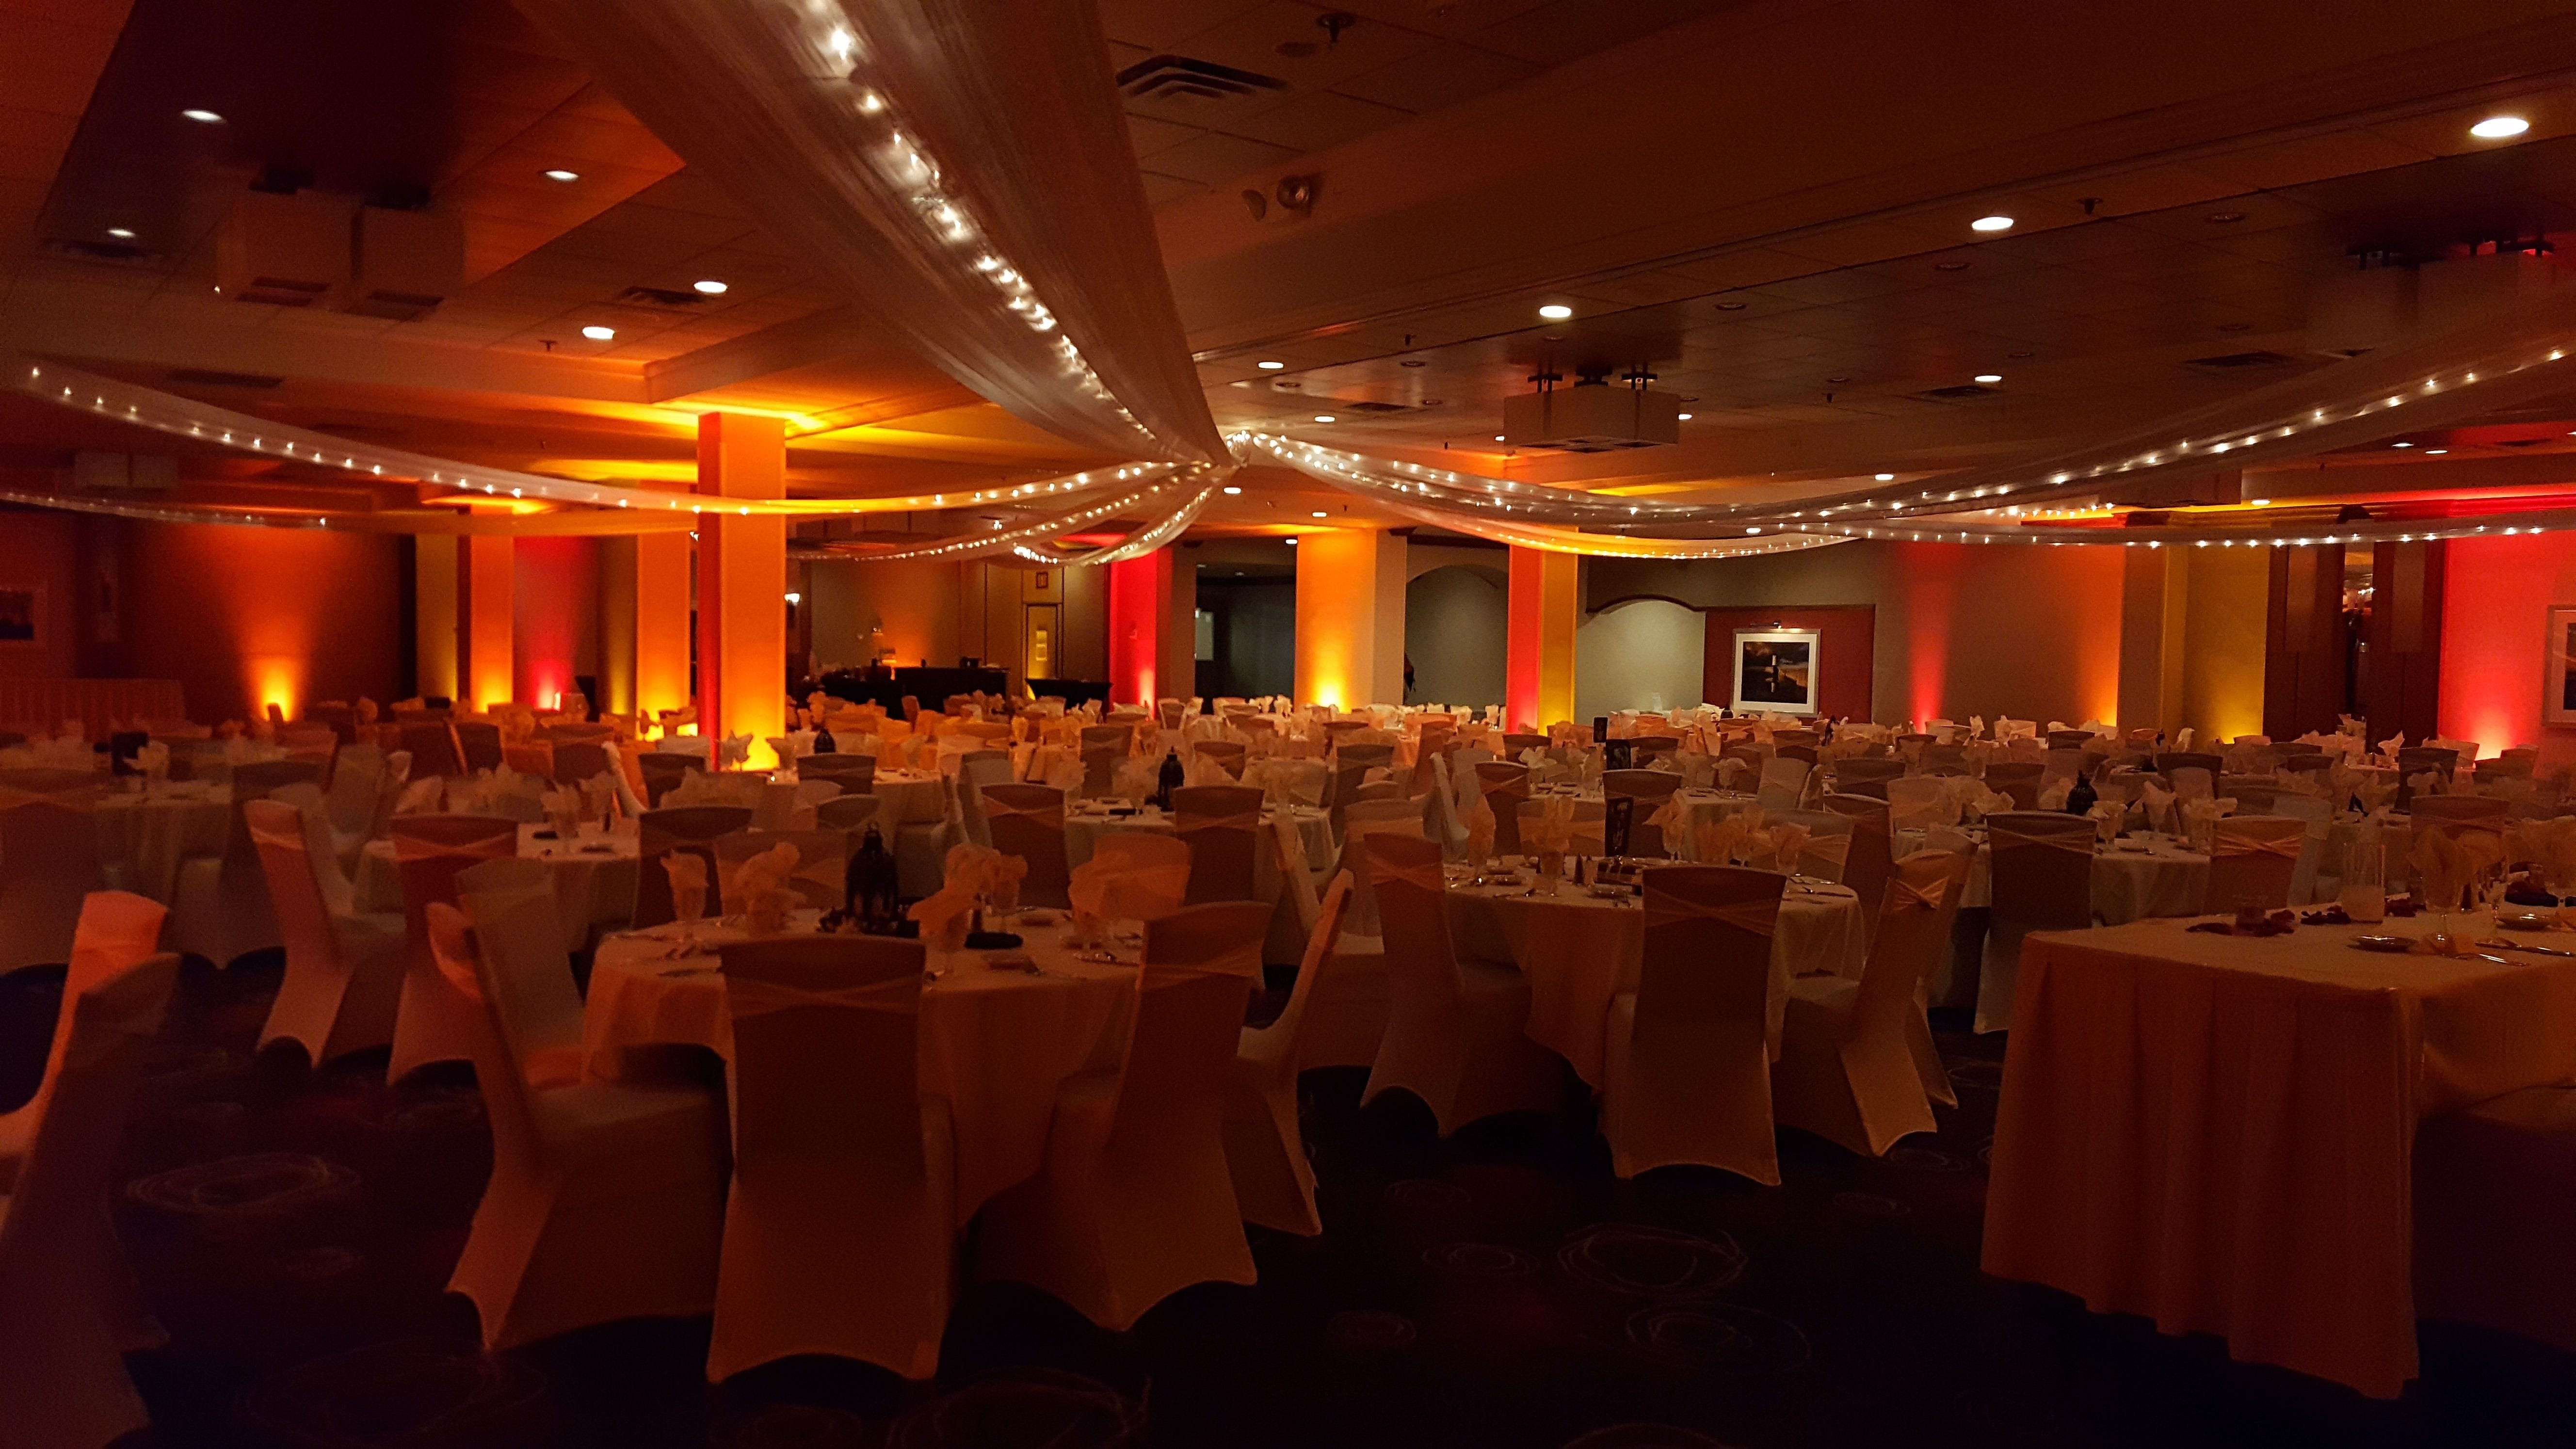 Holiday Inn wedding. Fall color theme with red, amber and orange up lighting.